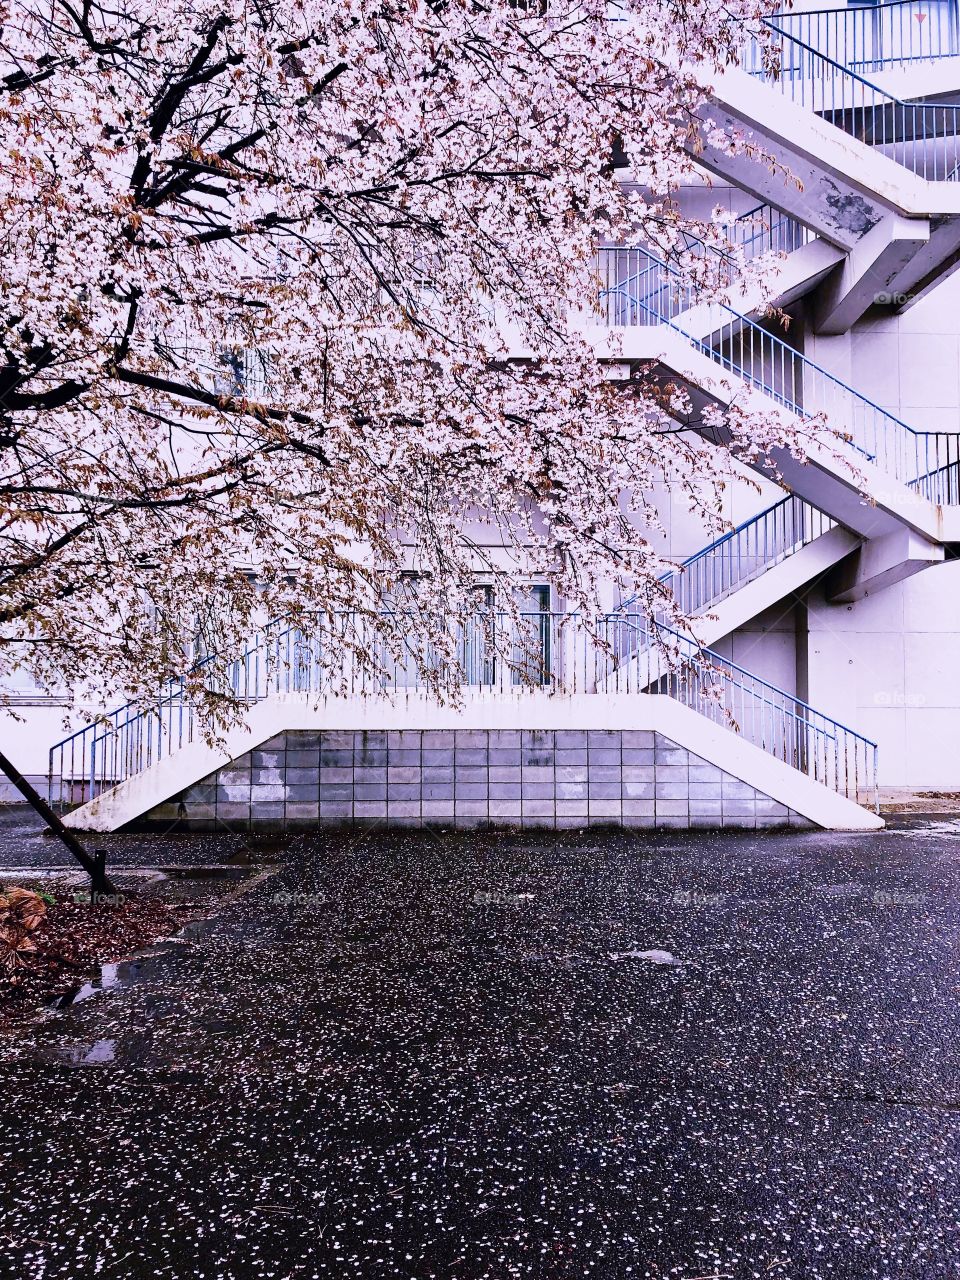 Falling Sakura Blossoms in front of a building